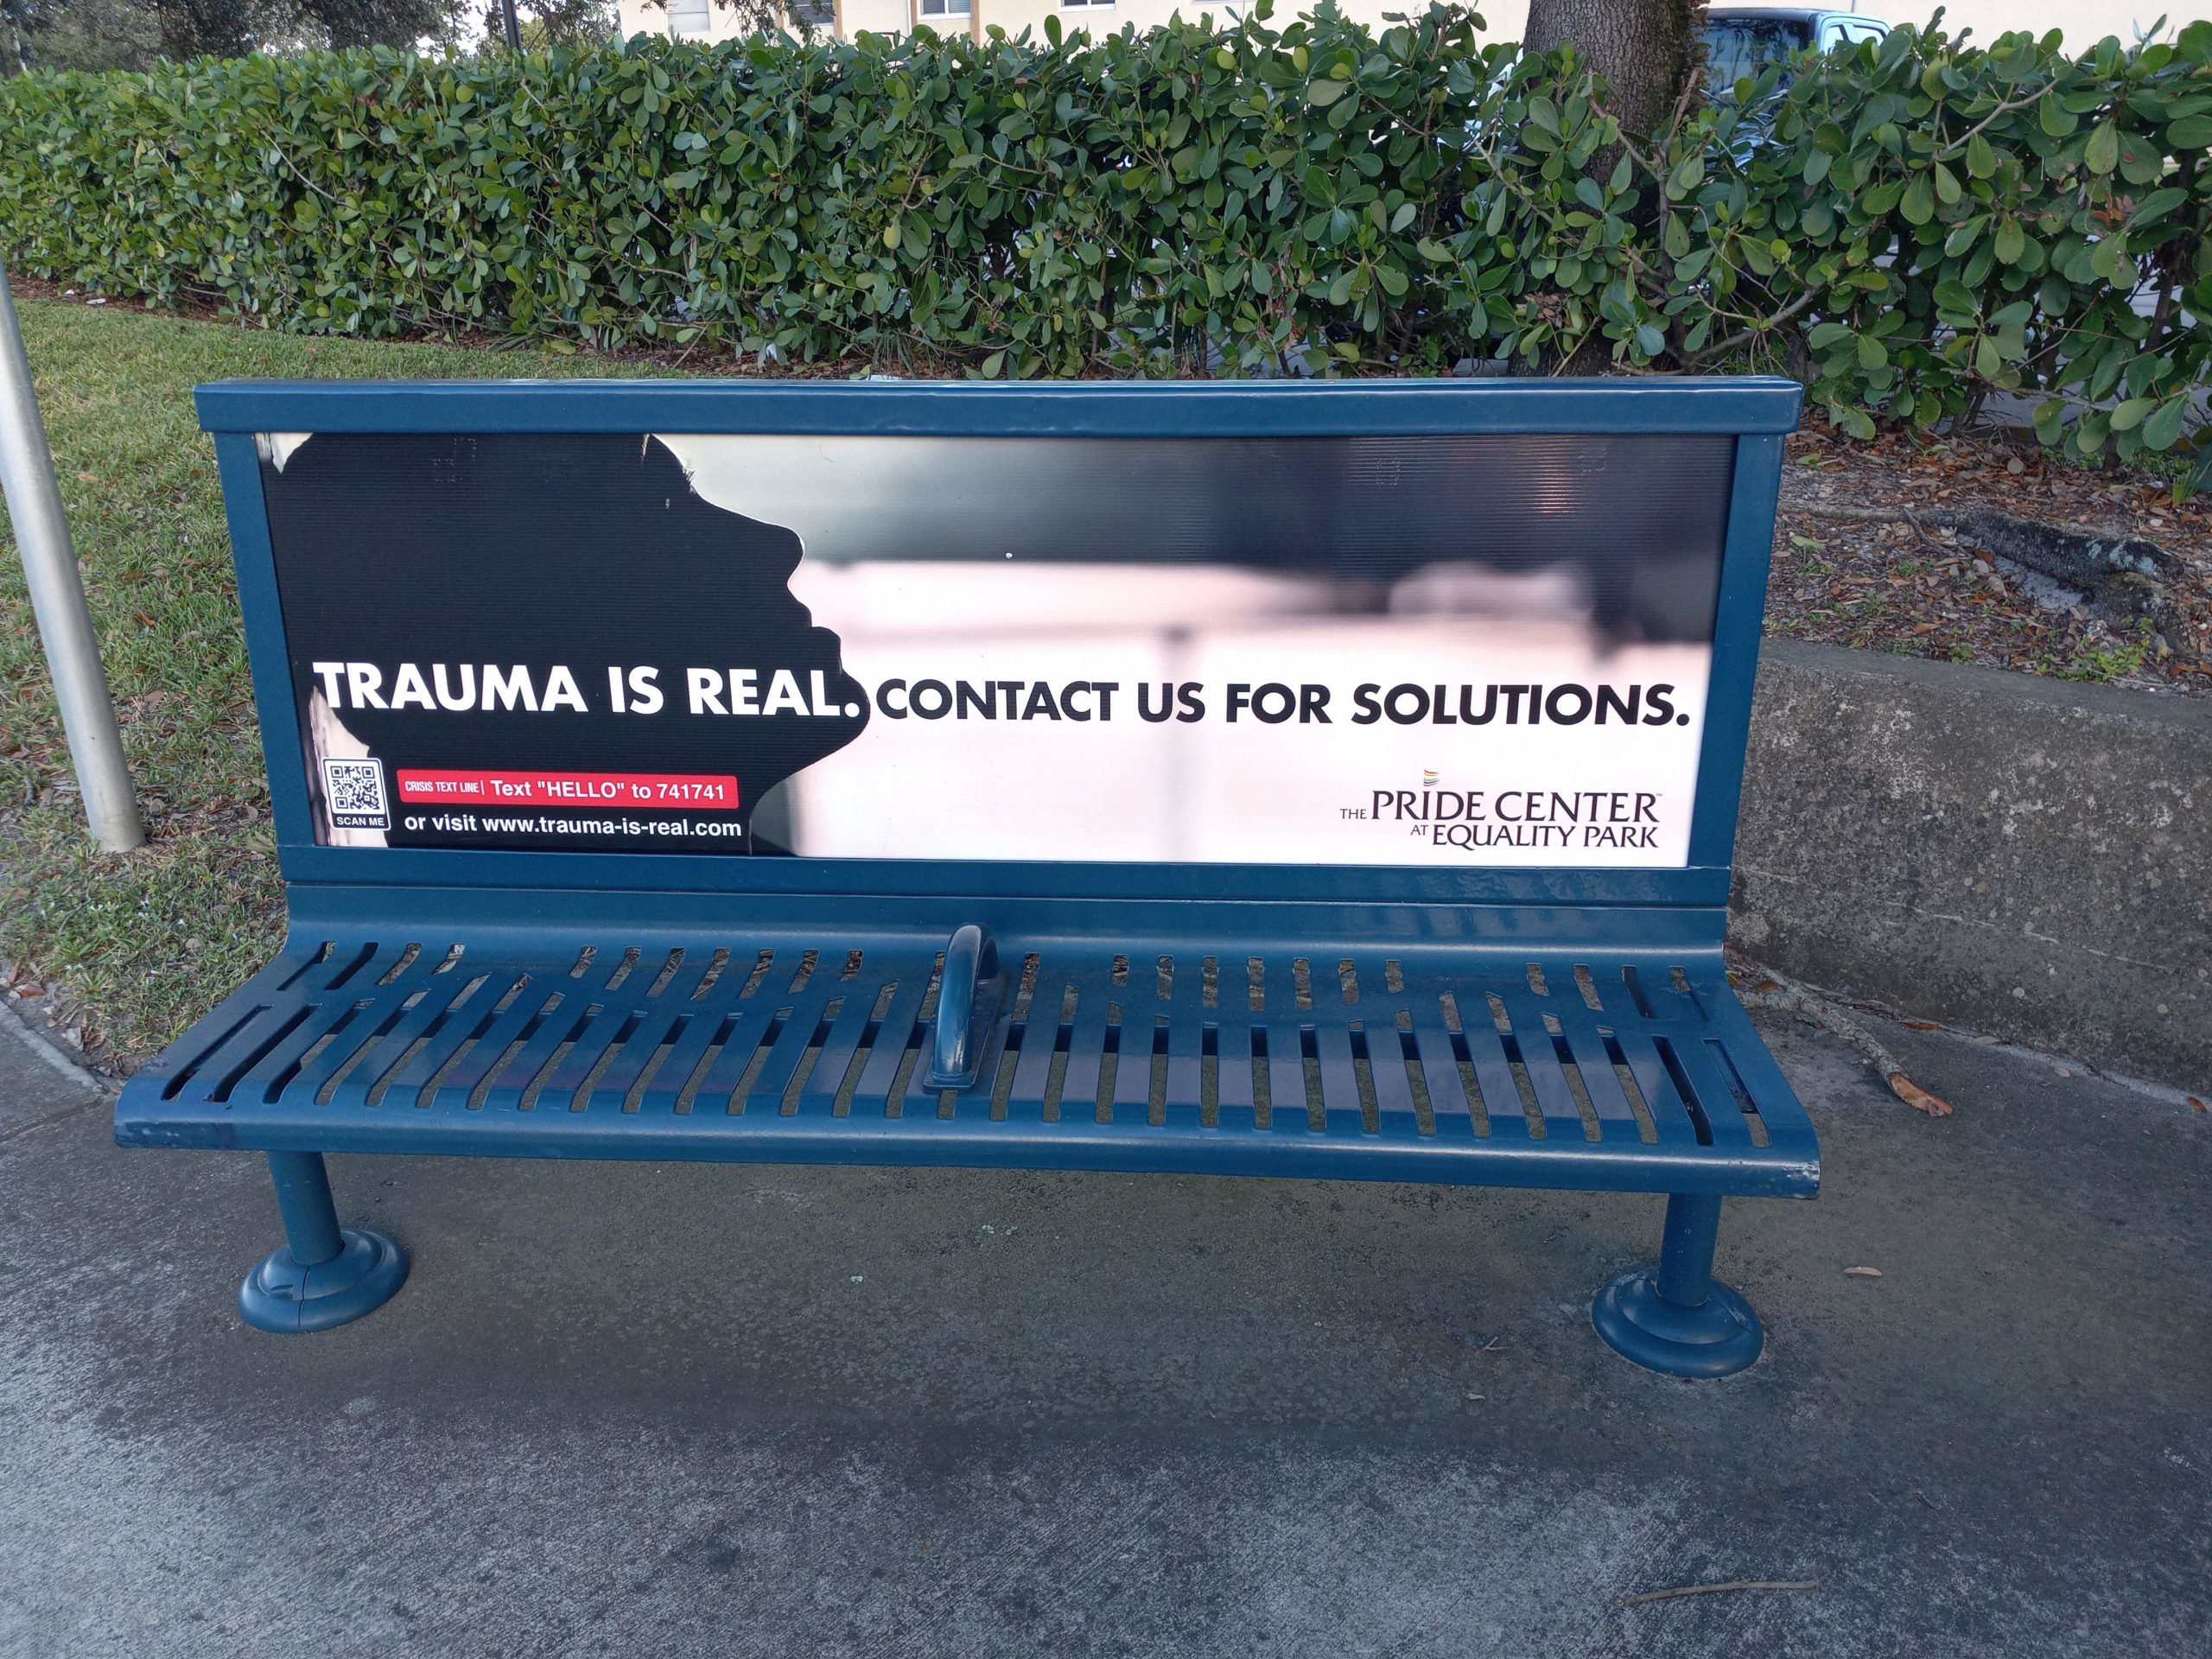 Funds from this project were used to launch a community awareness campaign around trauma. This is an image of one of our trauma posters out in the community on a public park bench. This project had 10 public benches and 10 bus stop shelter posters up for four weeks raising trauma awareness in Broward County. 